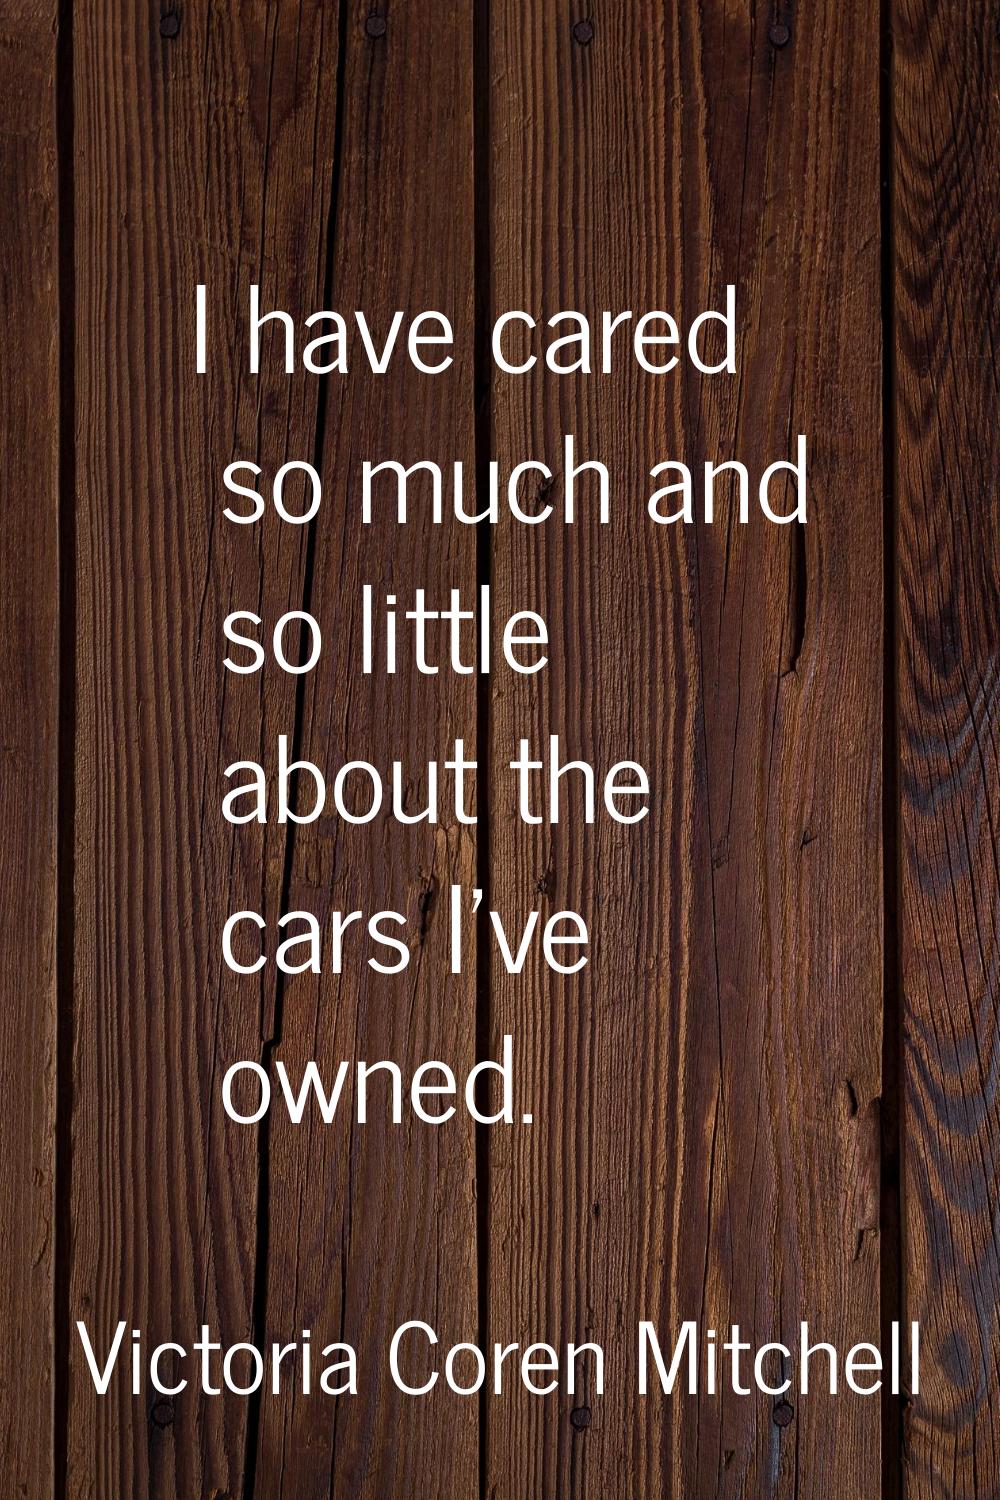 I have cared so much and so little about the cars I've owned.